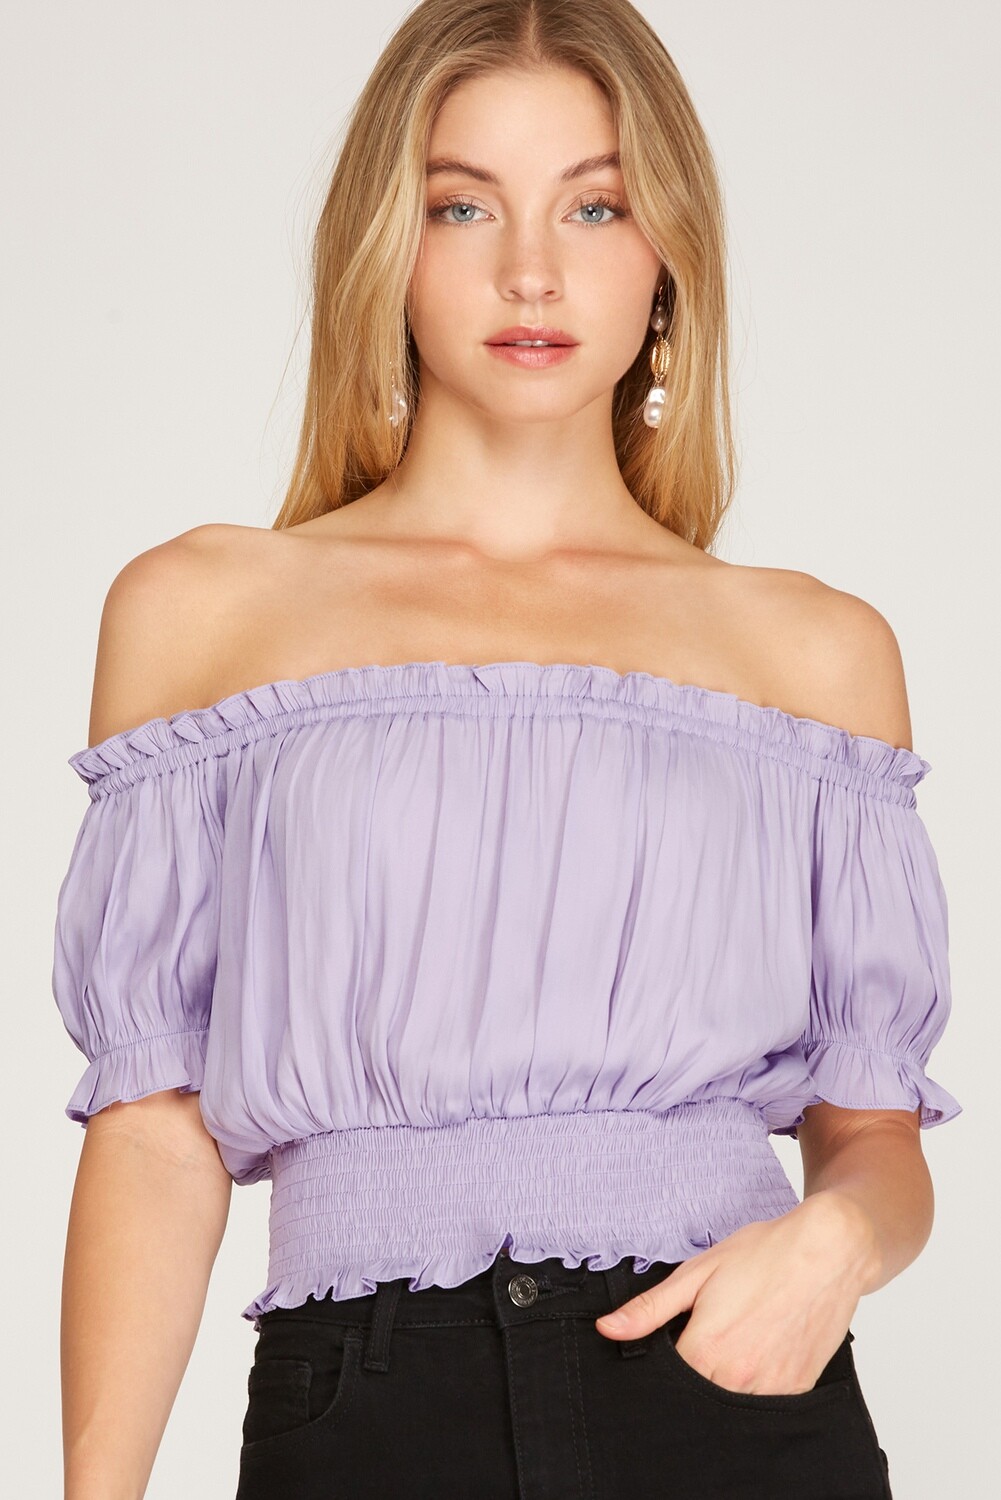 Lilac crop top SS8971, Size: S